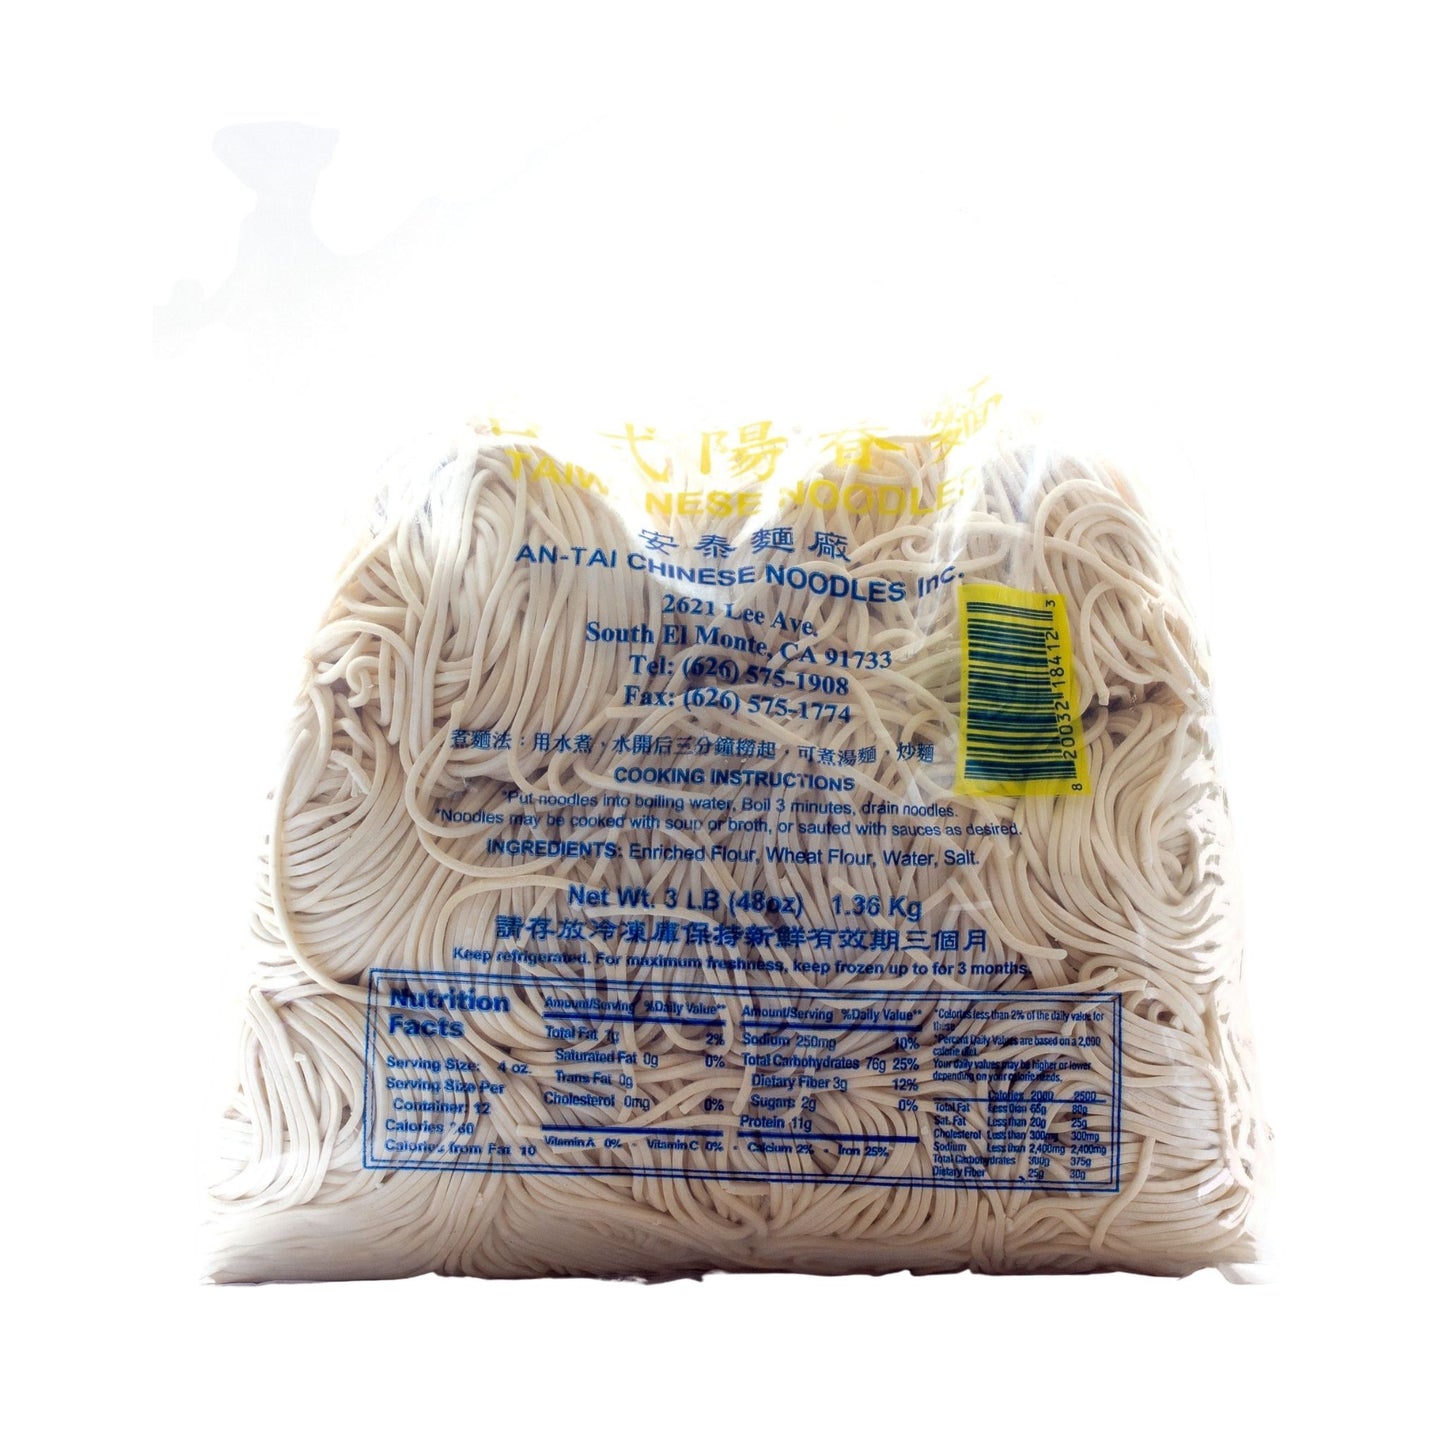 Taiwanese Noodles Small 小阳春面 (3 LBS)